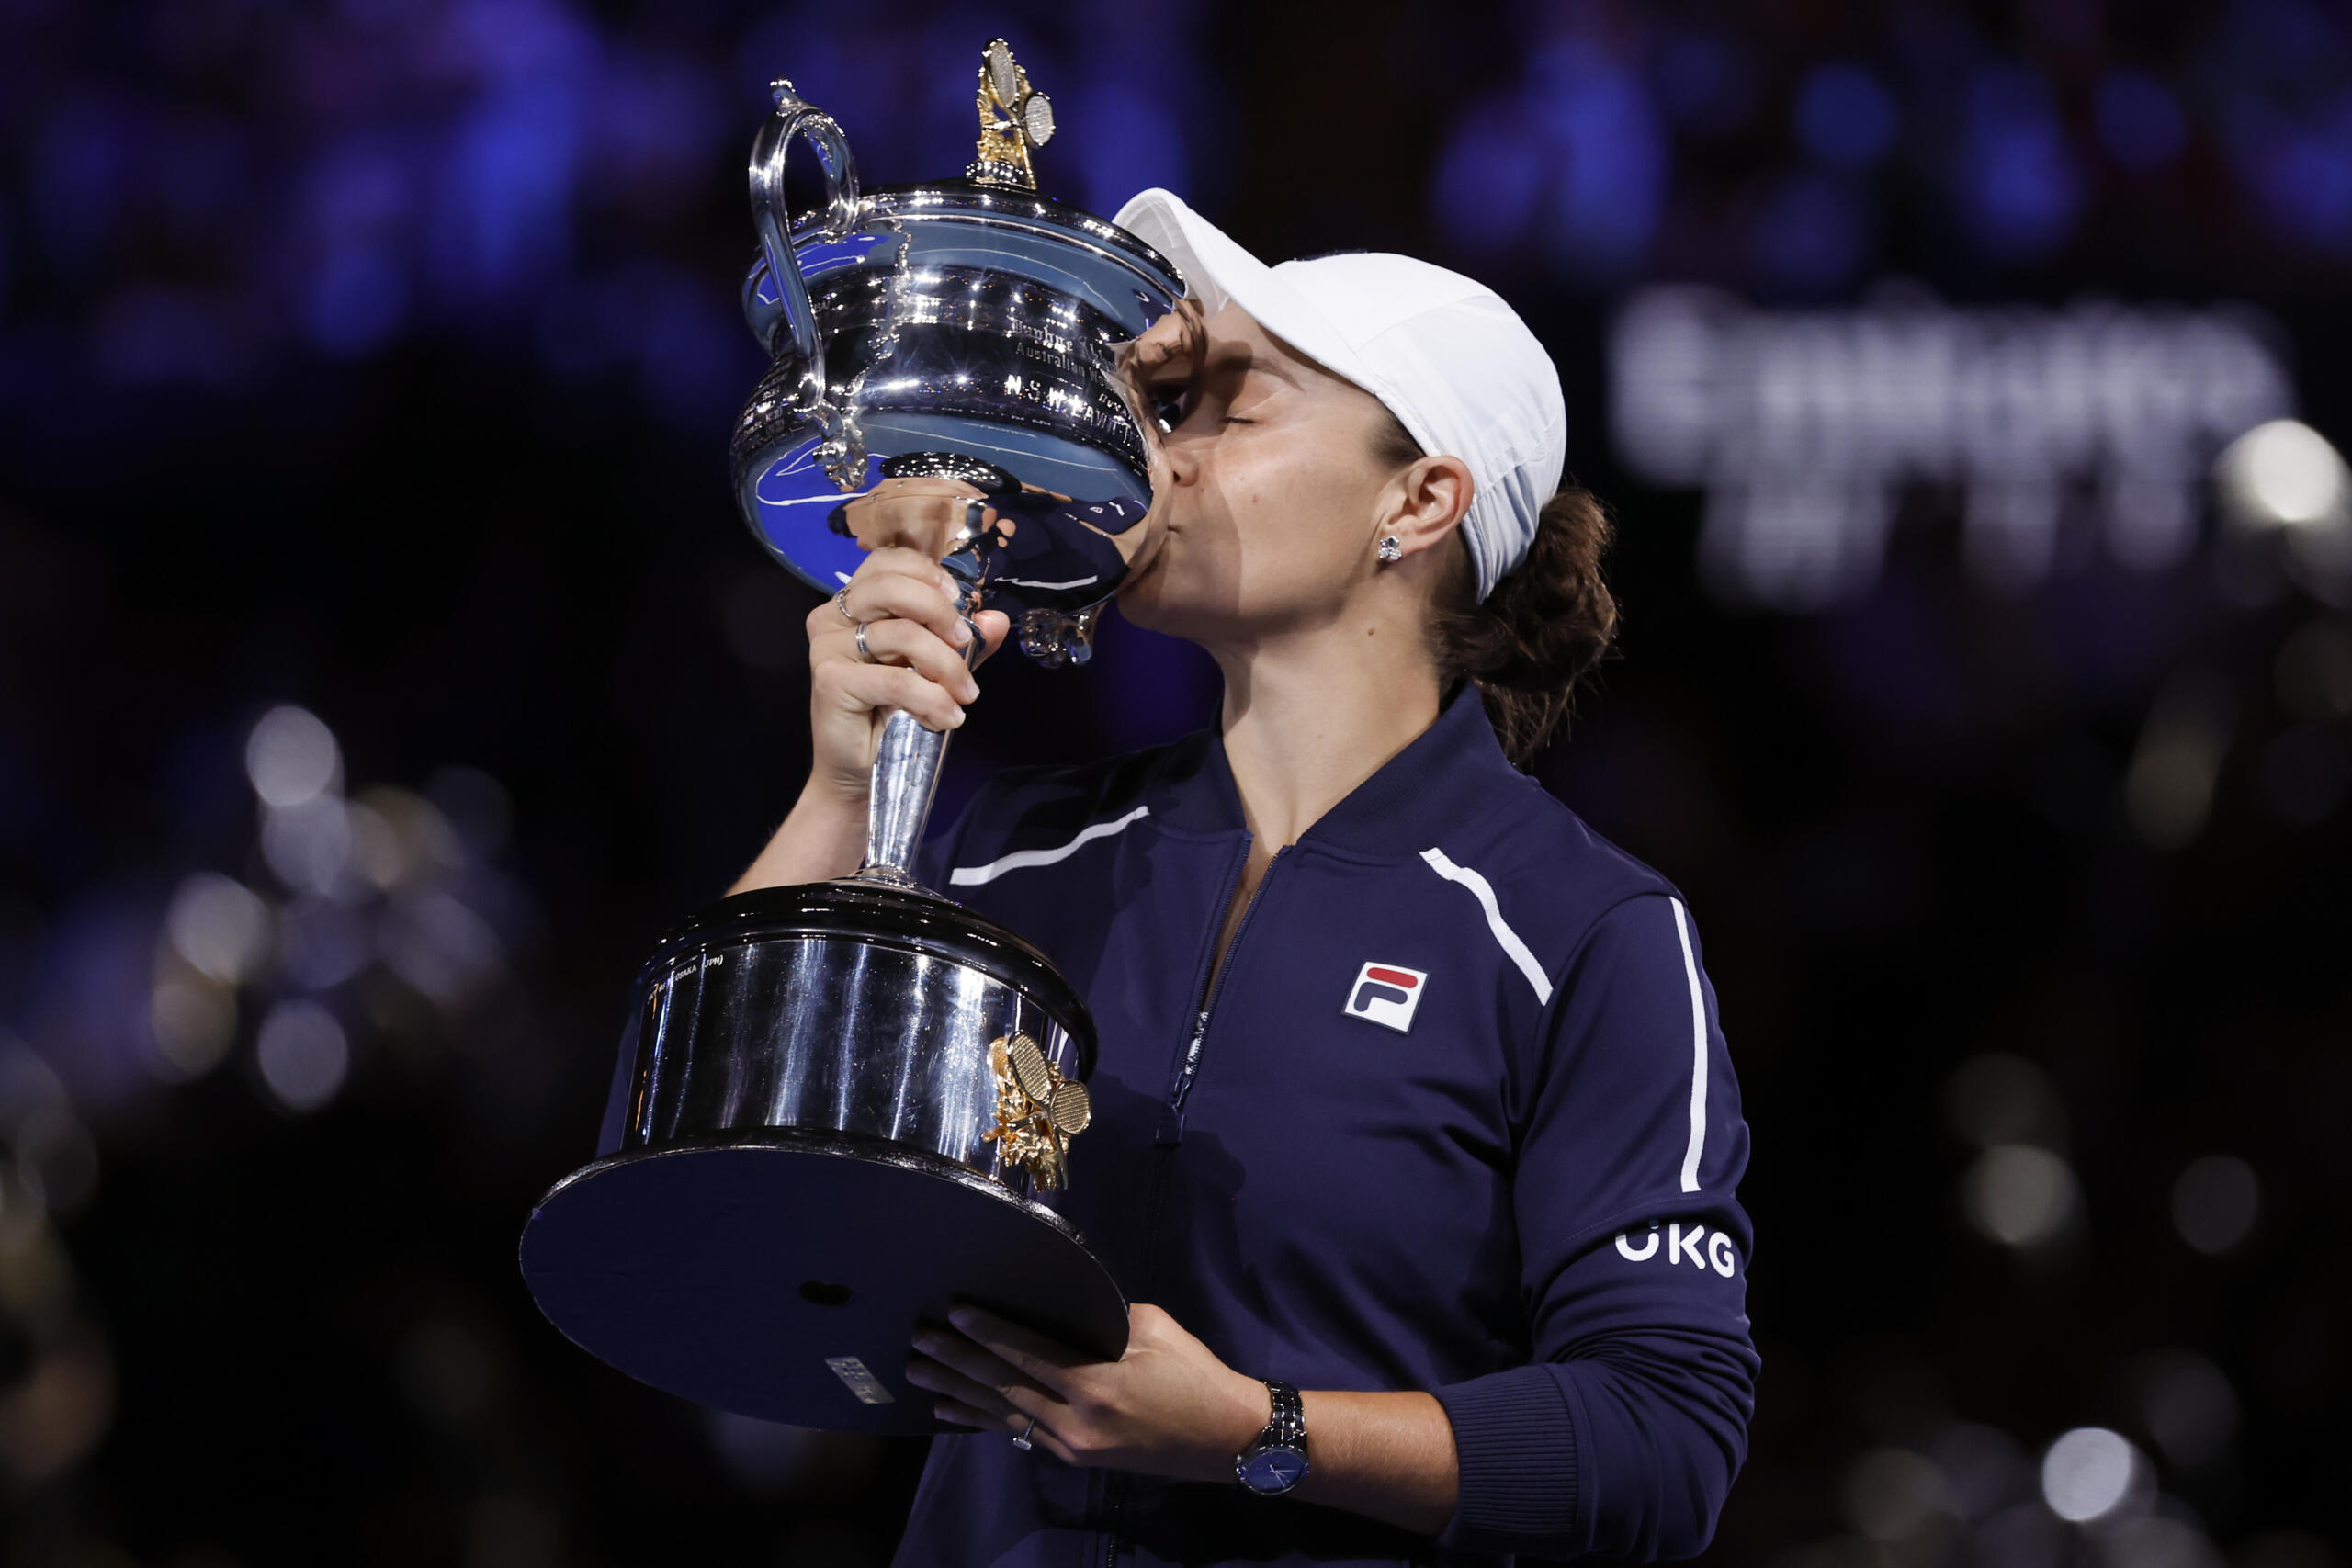 Ash Barty of Australia kisses the Daphne Akhurst Memorial Cup after defeating Danielle Collins of the U.S., in the women's singles final at the Australian Open tennis championships in Saturday, Jan.